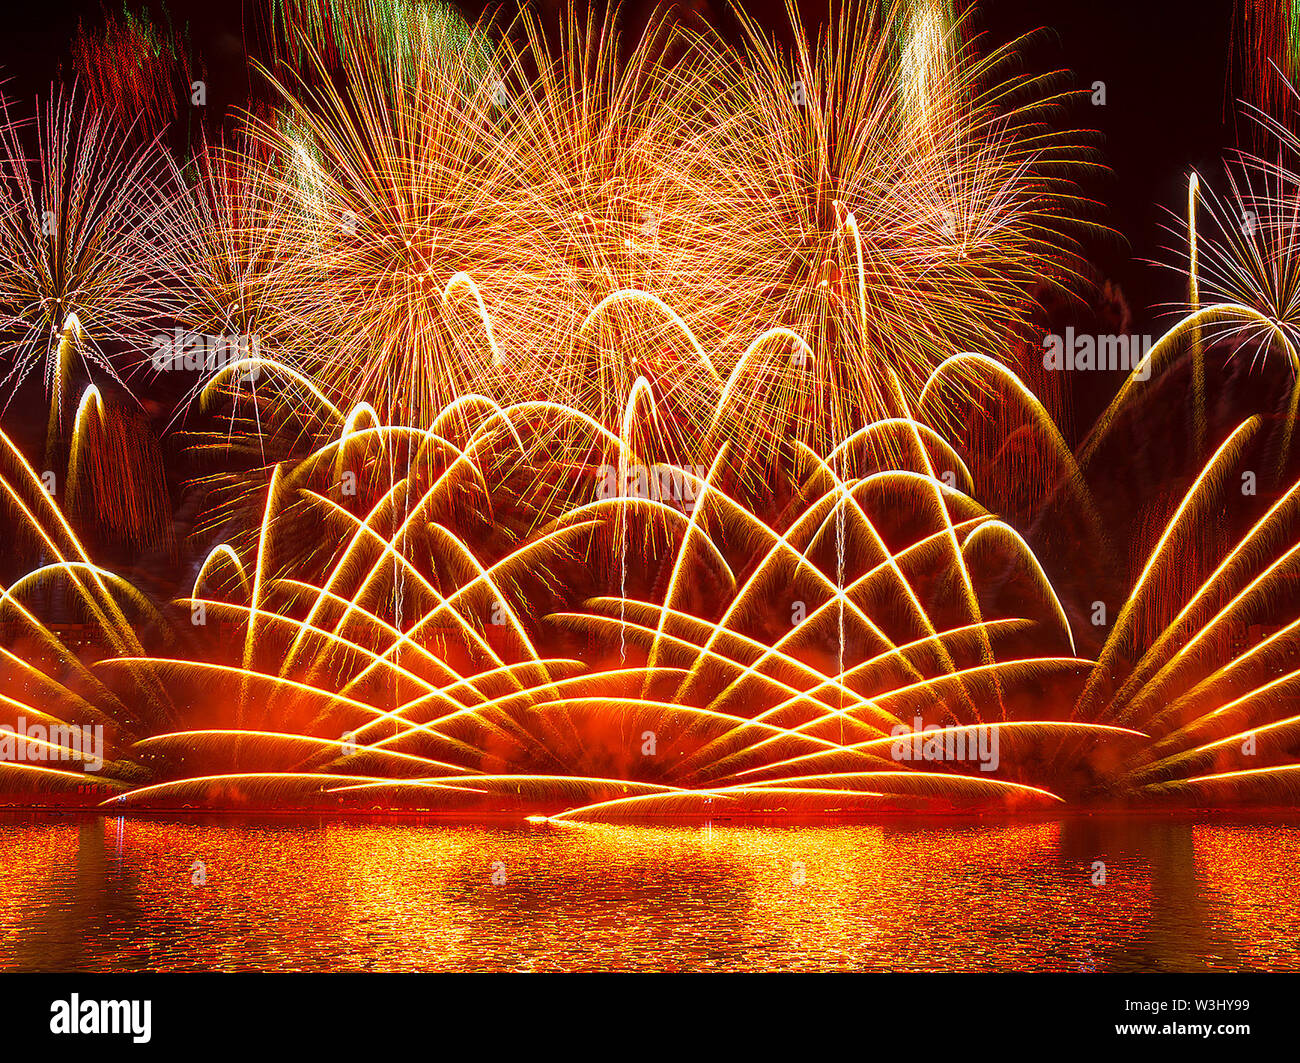 Fireworks display background at night for new year celebration Stock Photo